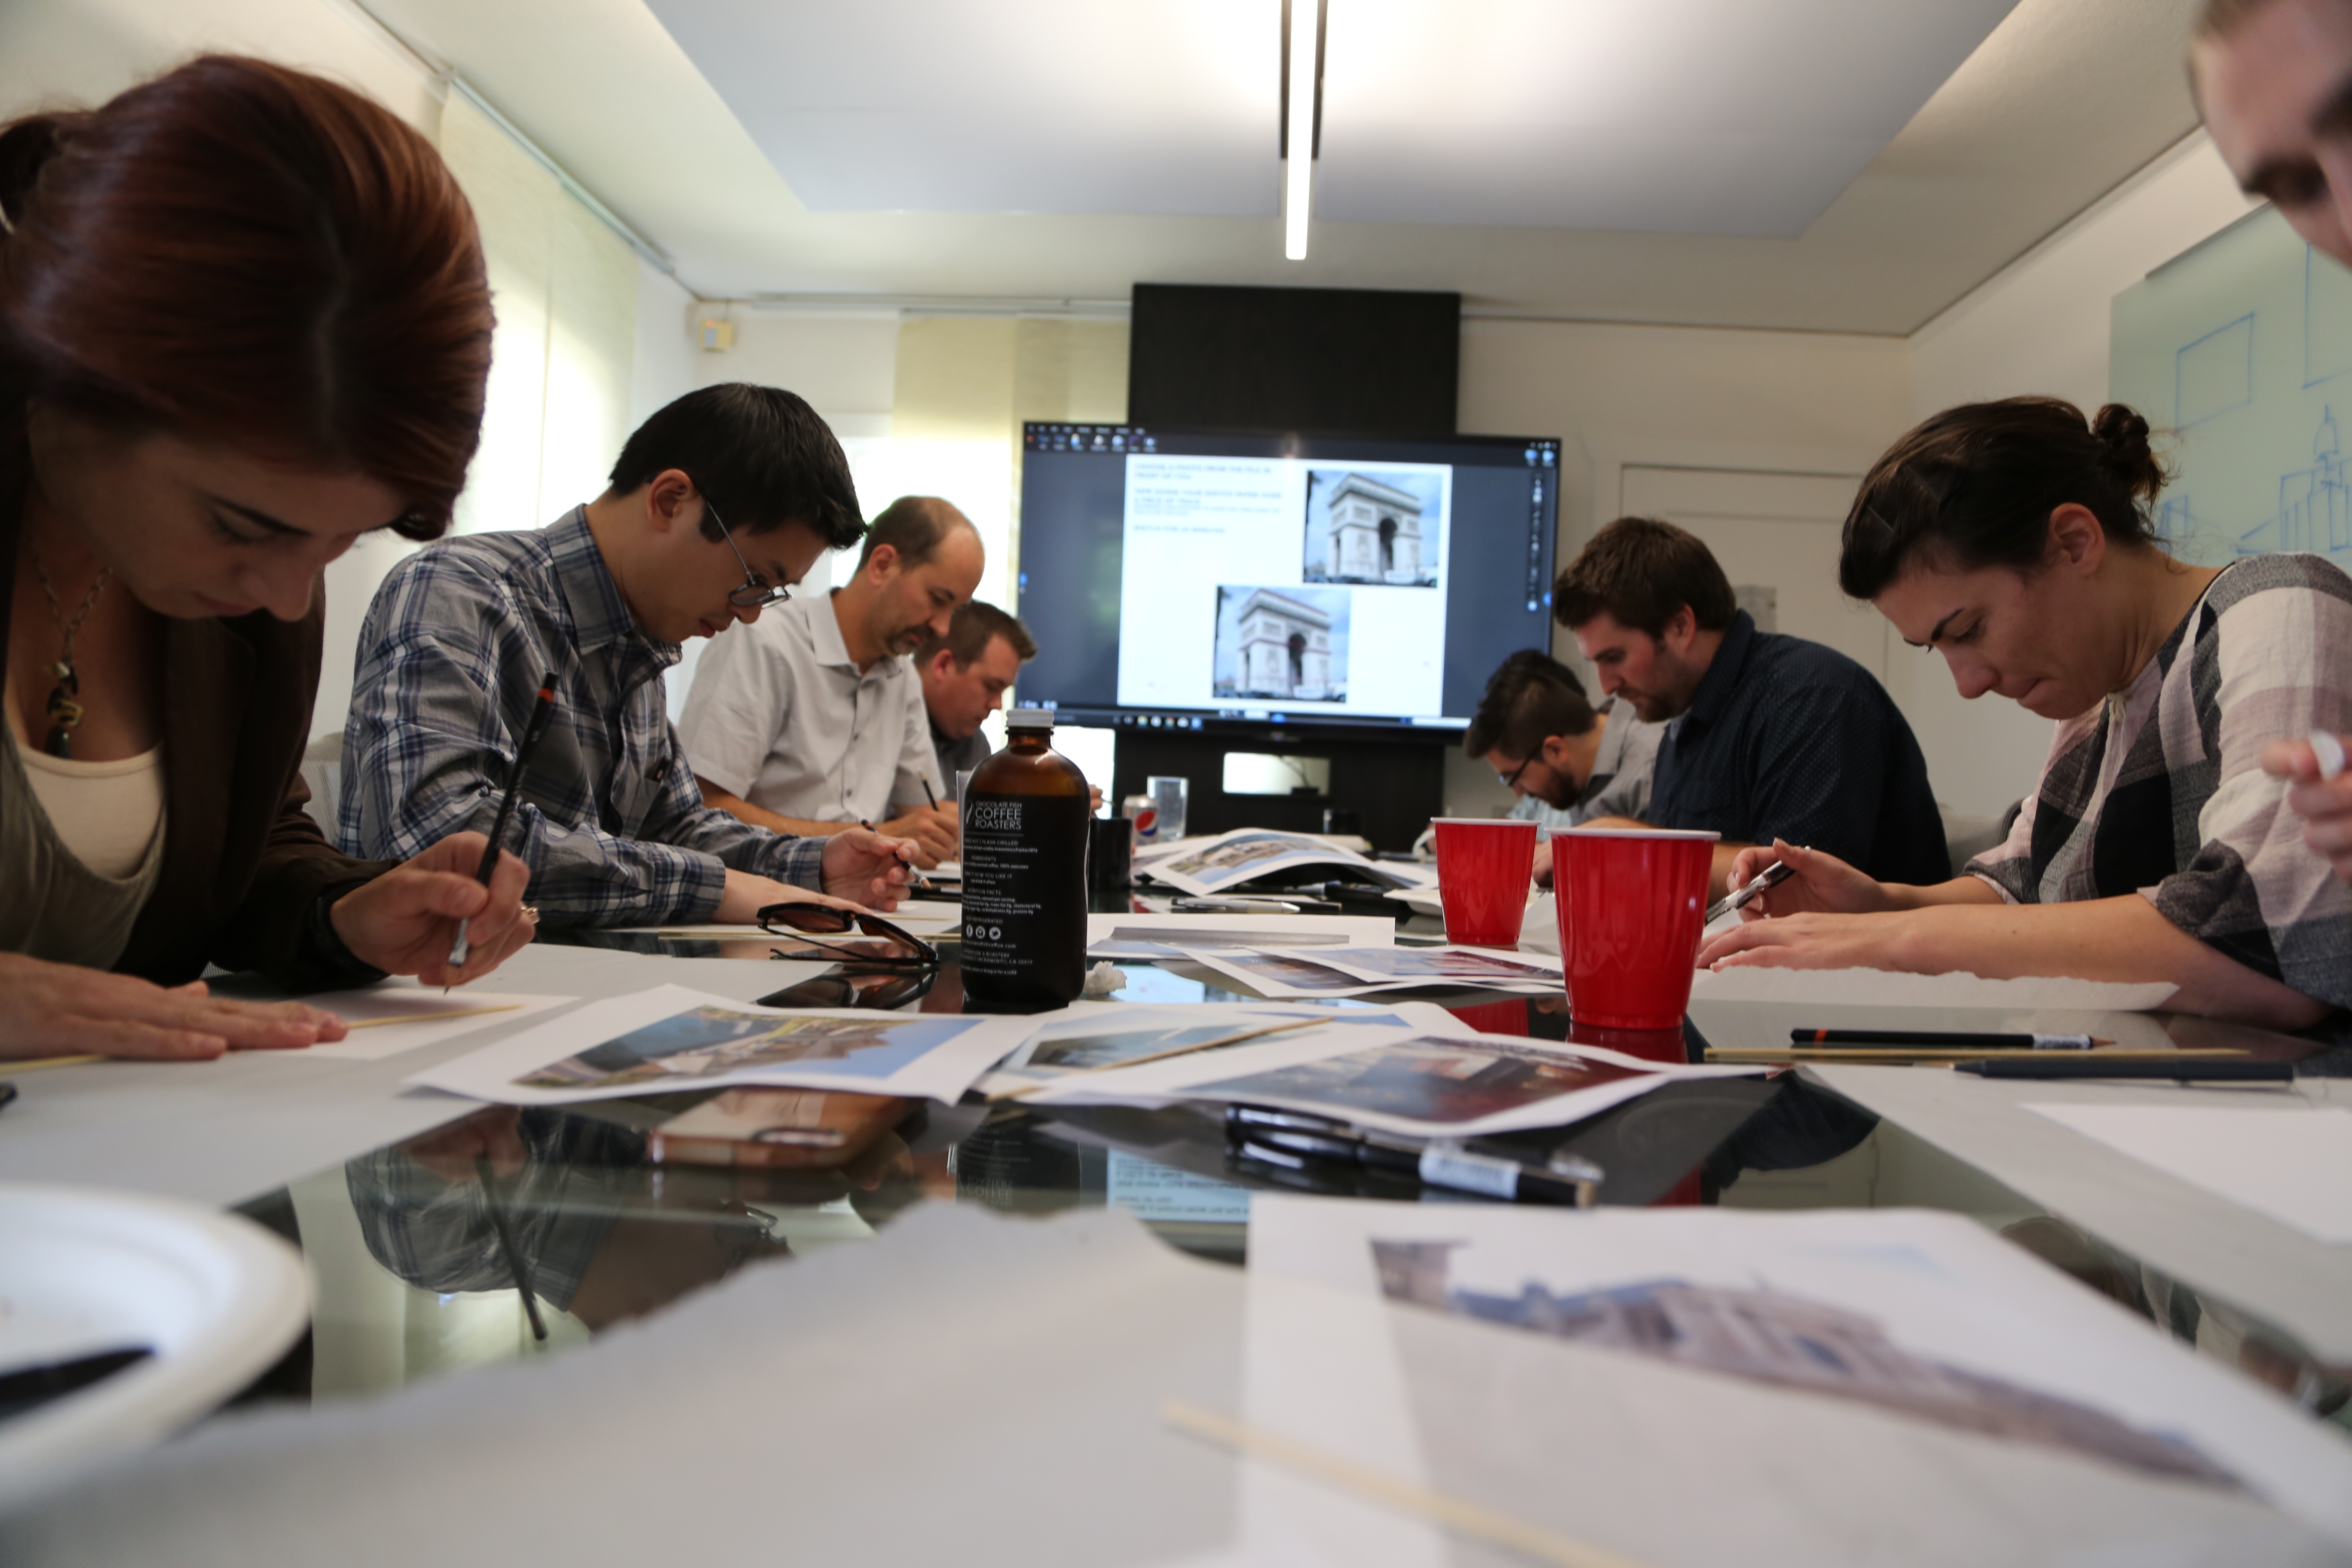 Intense concentration at the 2 point perspective workshop.